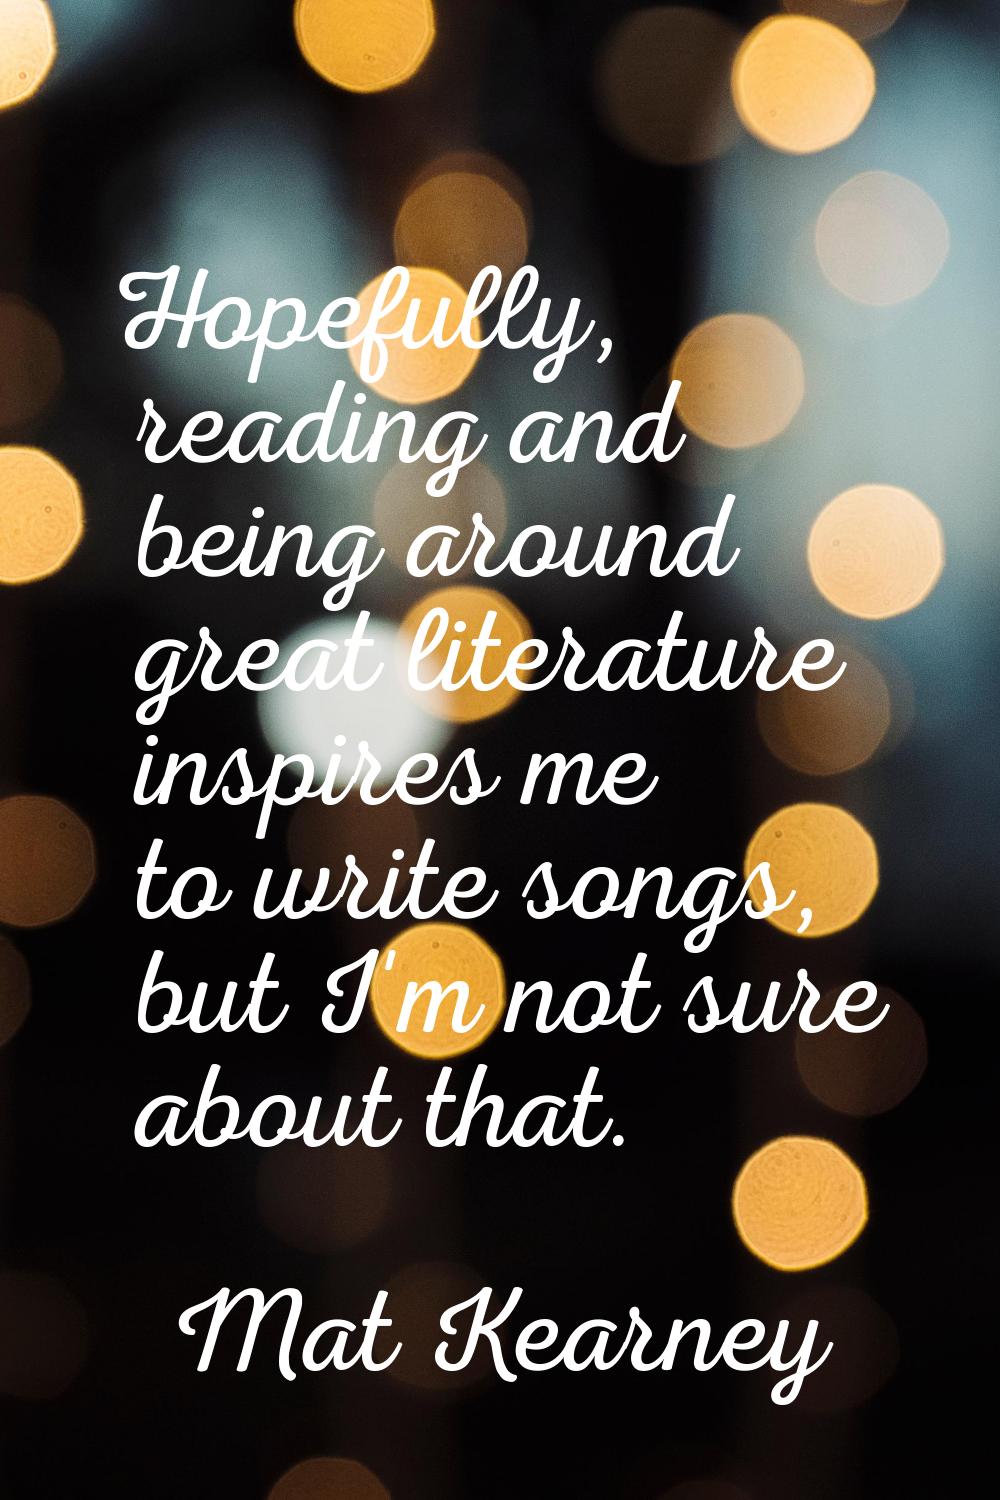 Hopefully, reading and being around great literature inspires me to write songs, but I'm not sure a